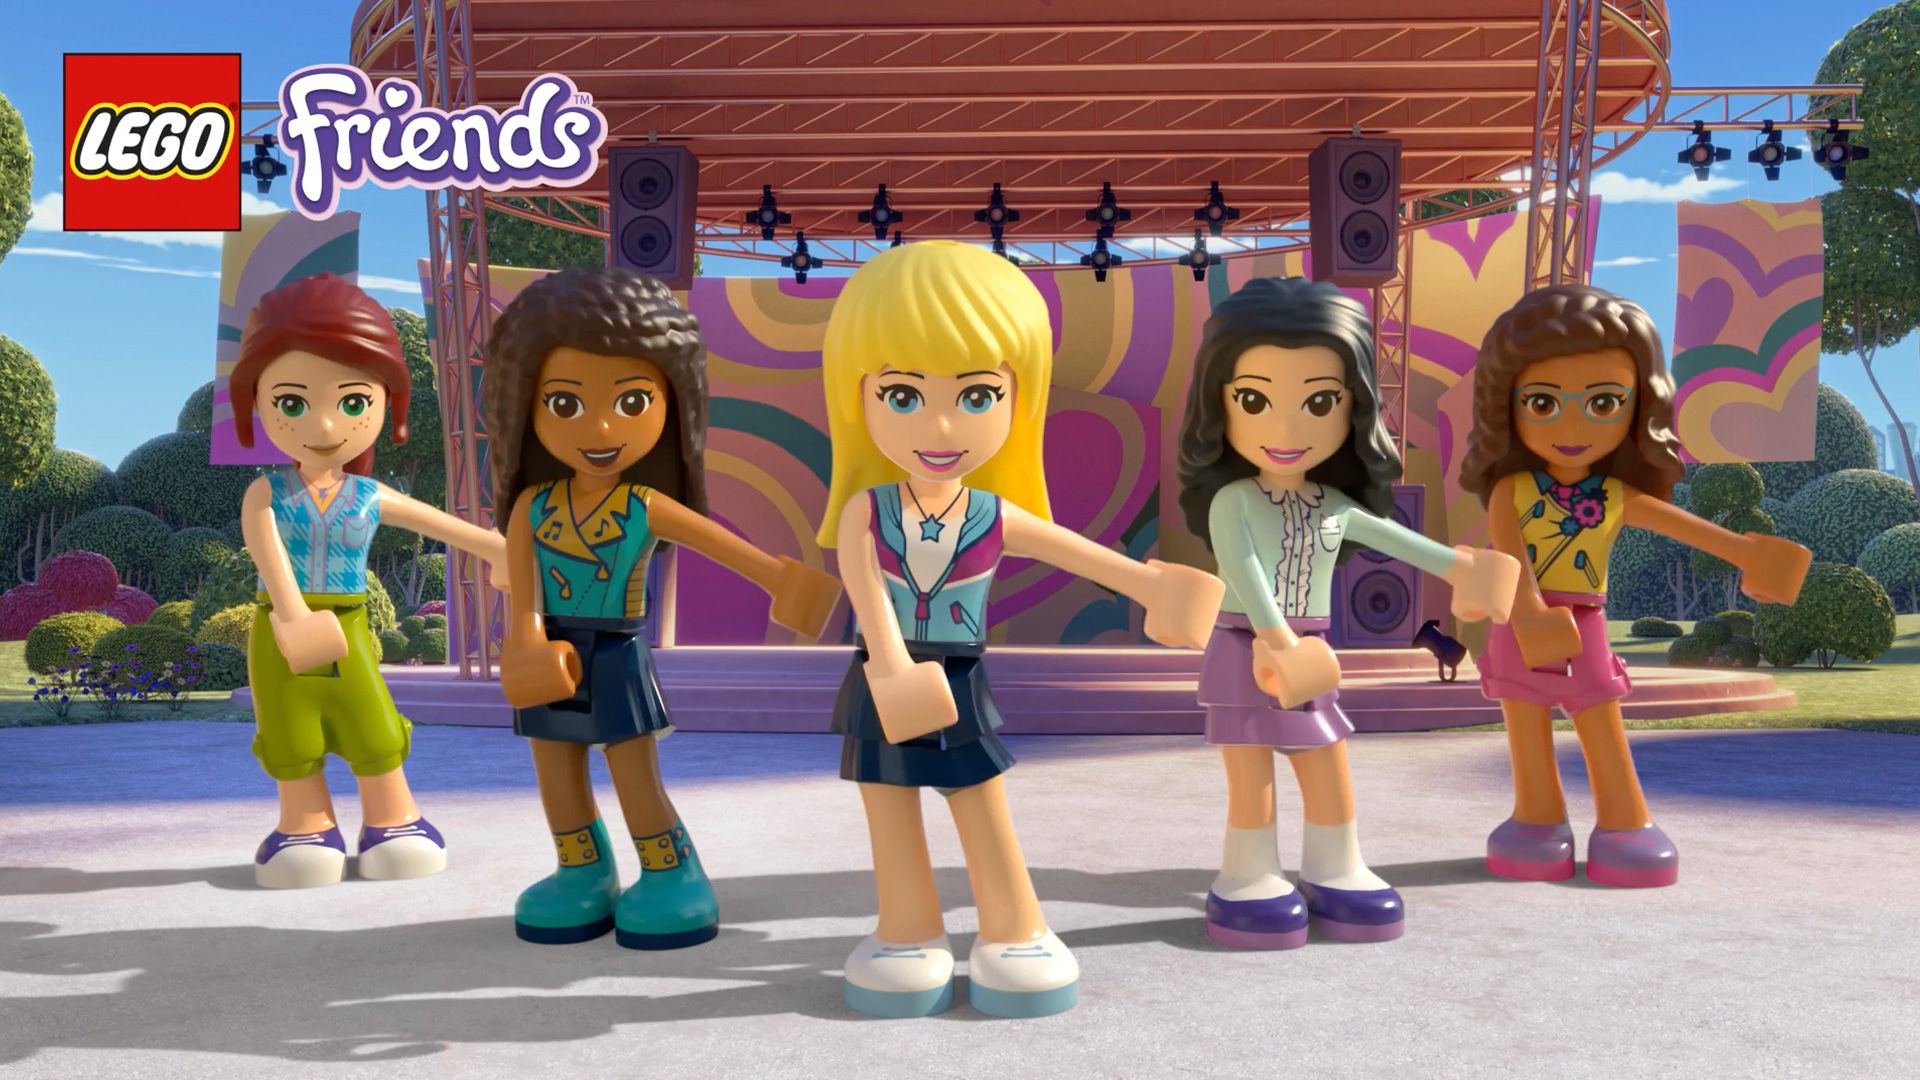 Lego Friends Wallpapers